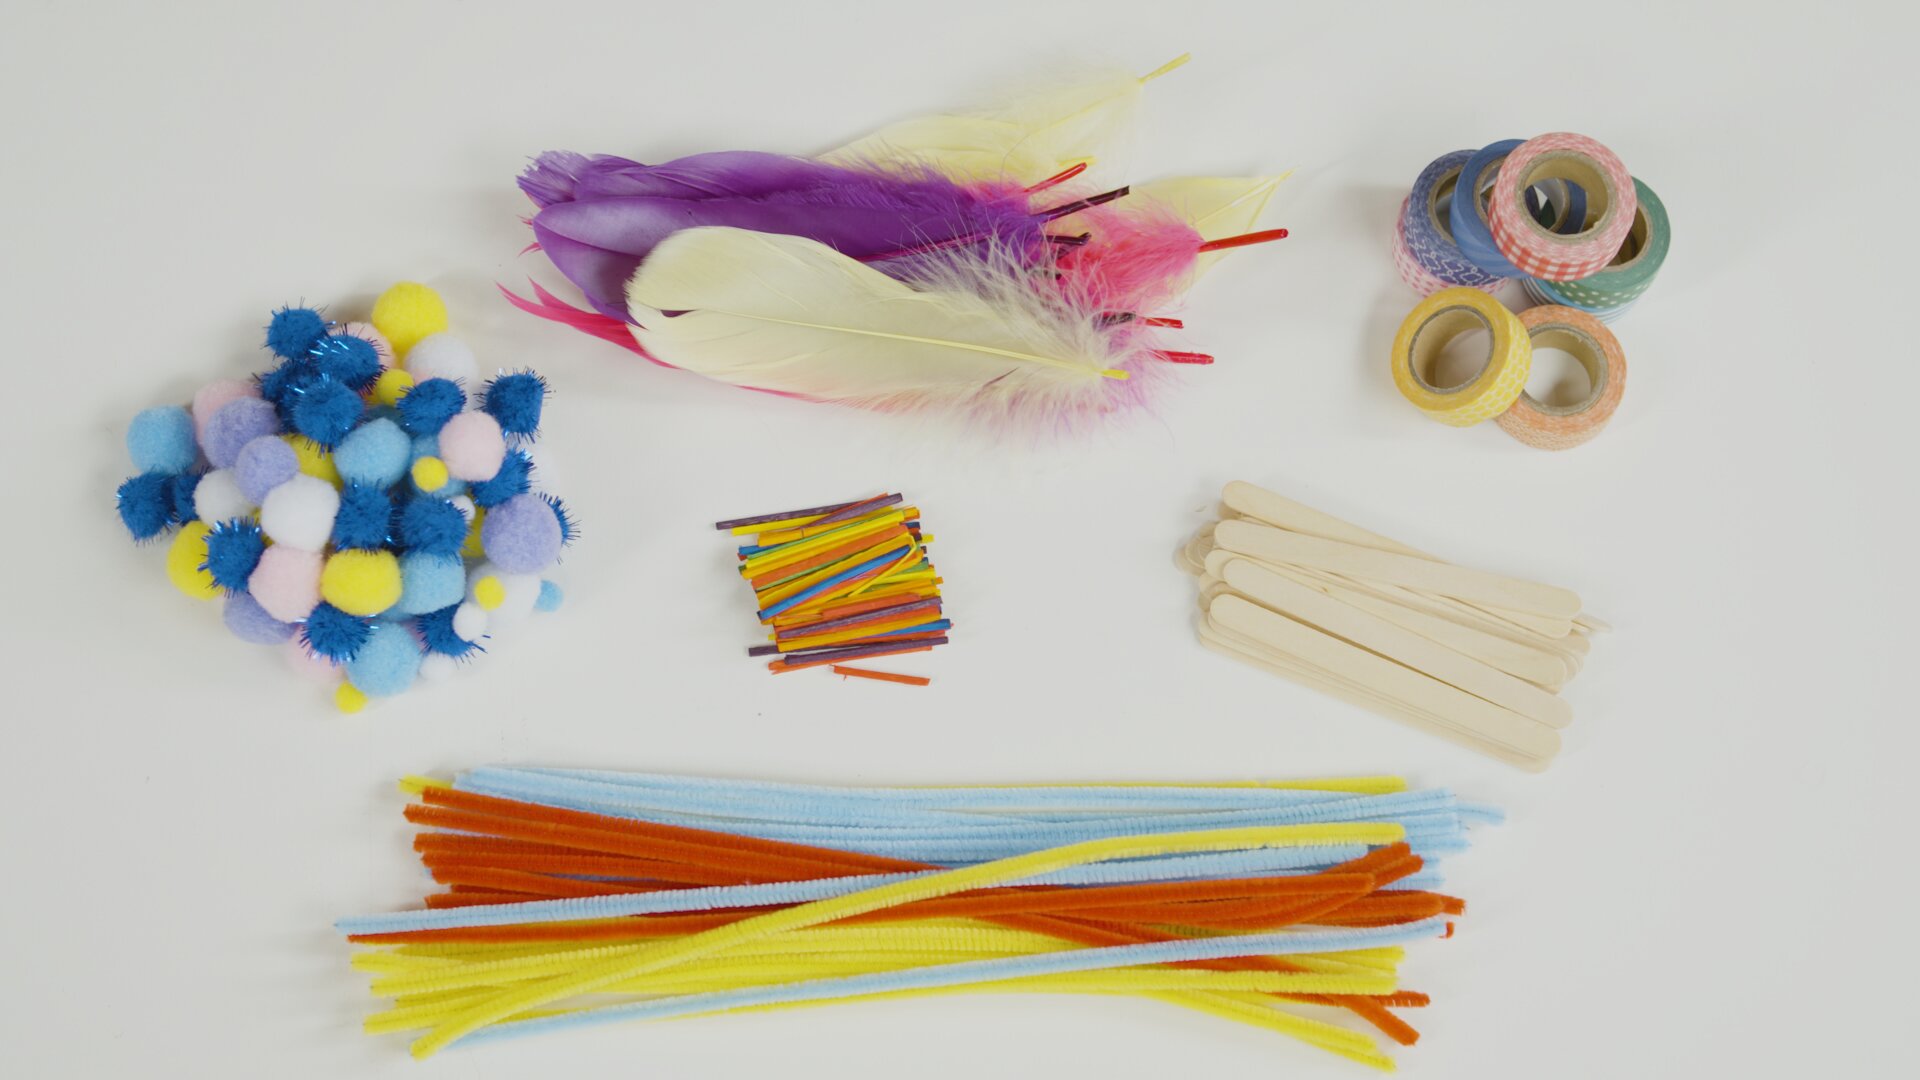 Coloured pom poms, pipe cleaners, feathers, washi tape & matchsticks